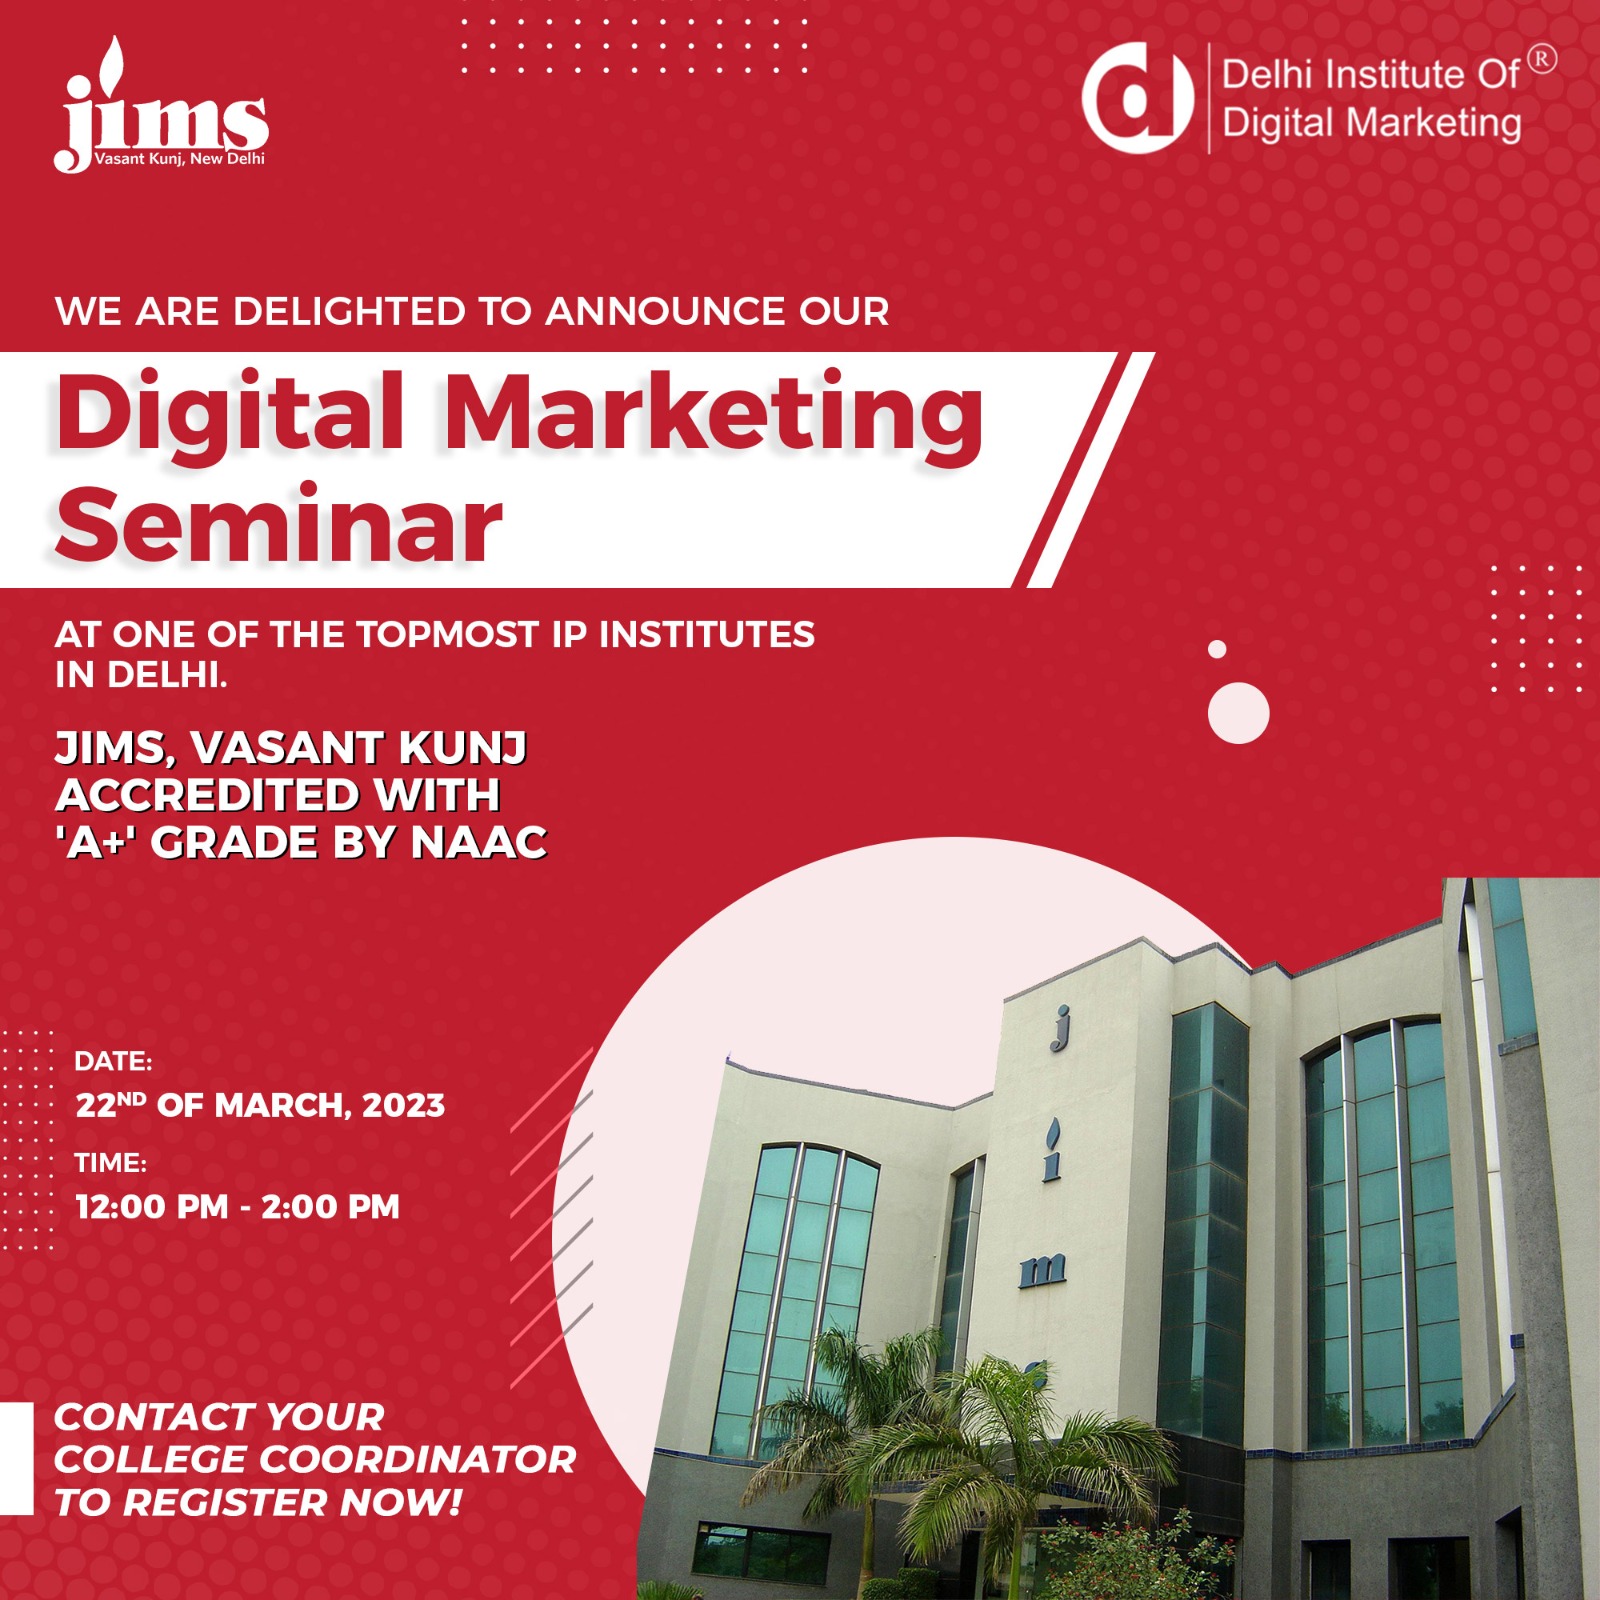 DIDM seminar will take place at one of Delhi's most renowned IP institutes, JIMS (Vasant Kunj)